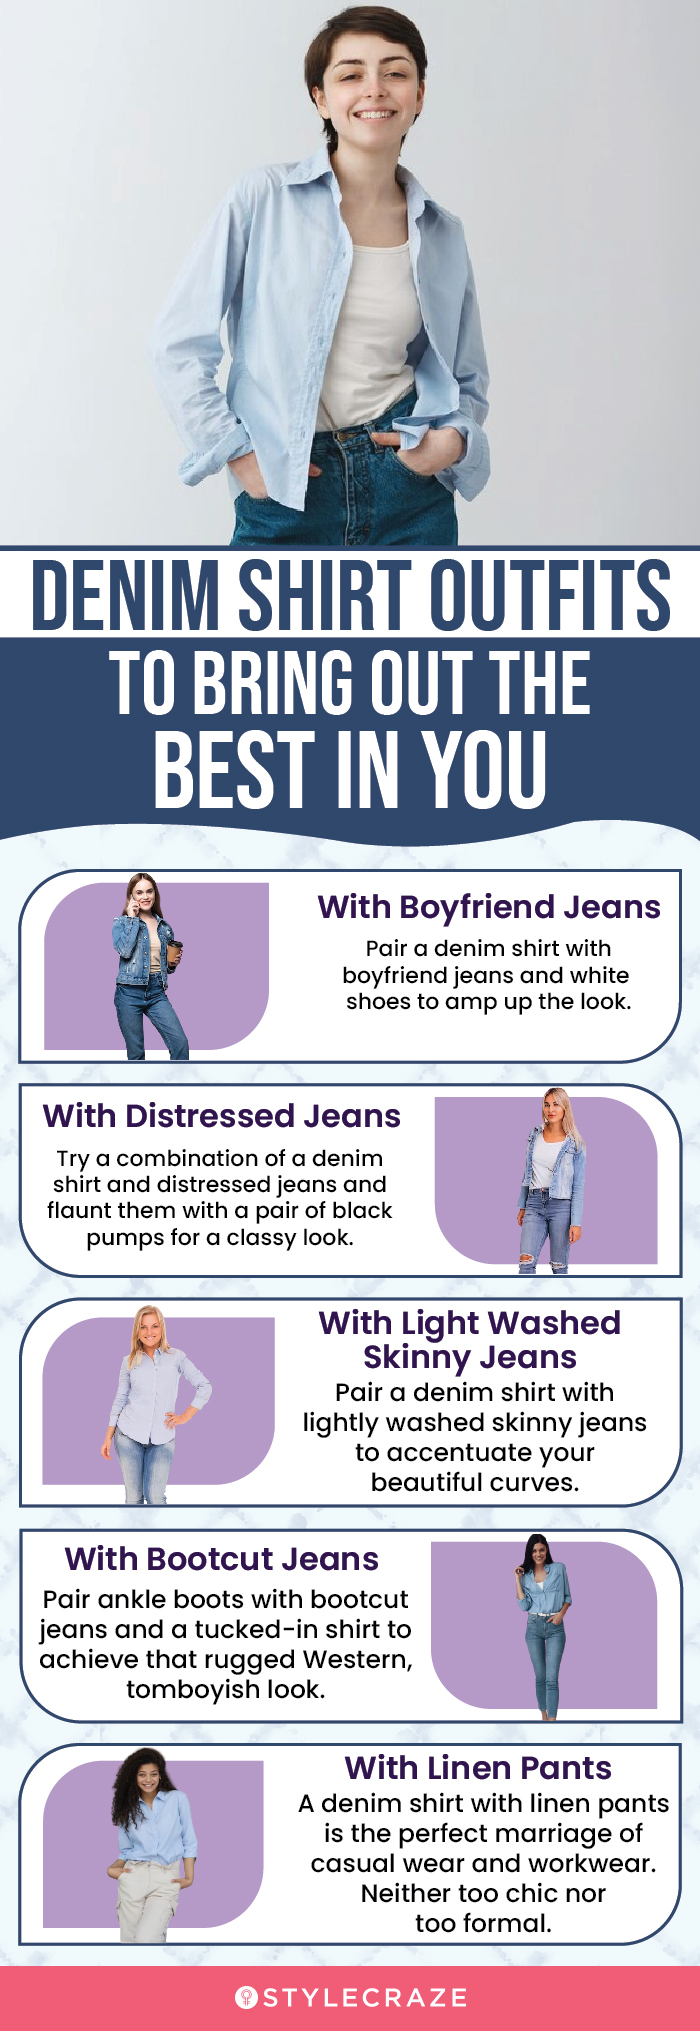 denim shirt outfits to bring out the best in you (infographic)